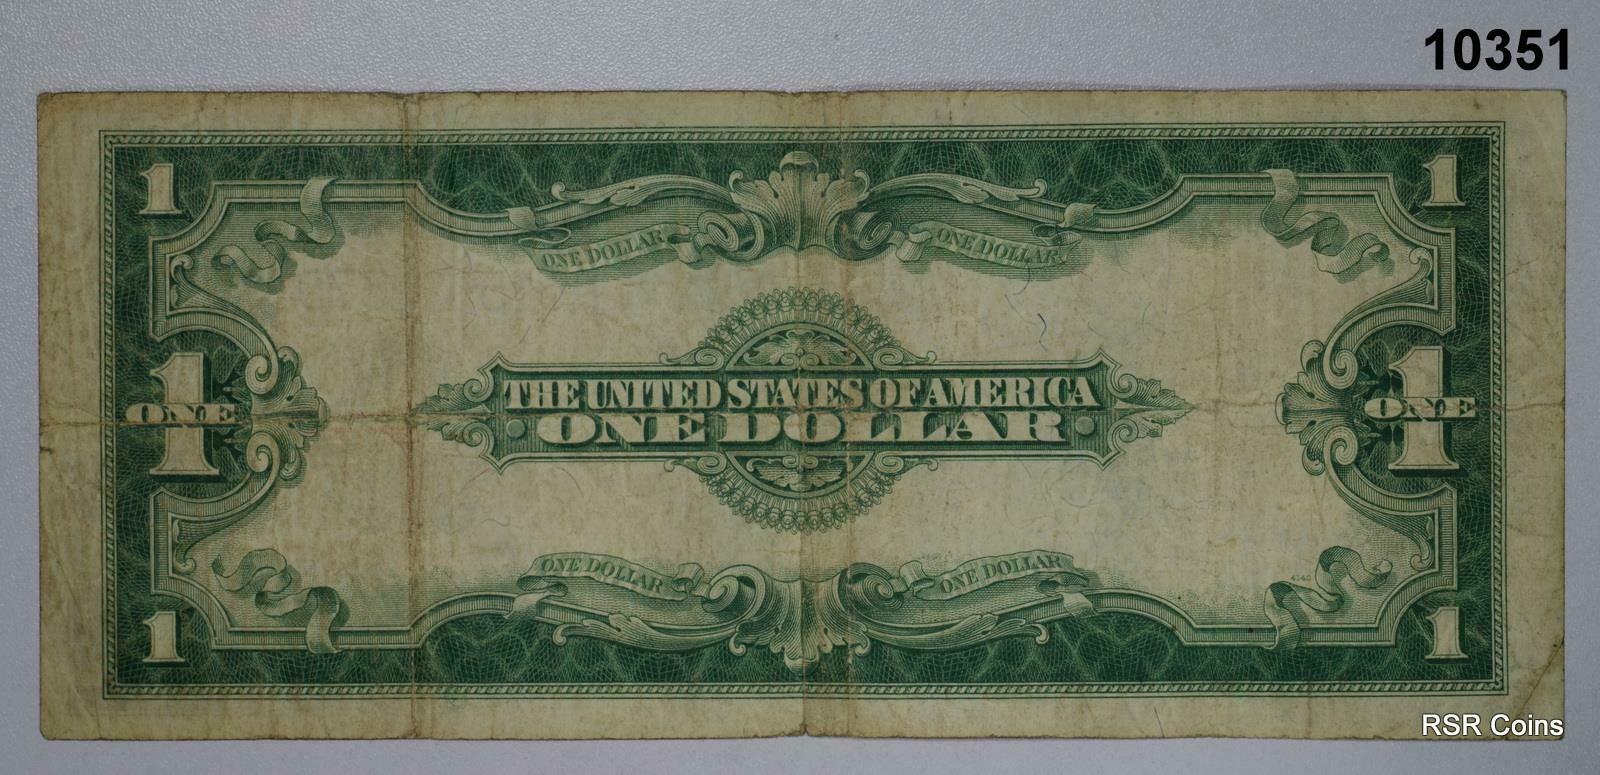 1923 $1 SILVER CERTIFICATE LARGE SIZE HORSE BLANKET #10351